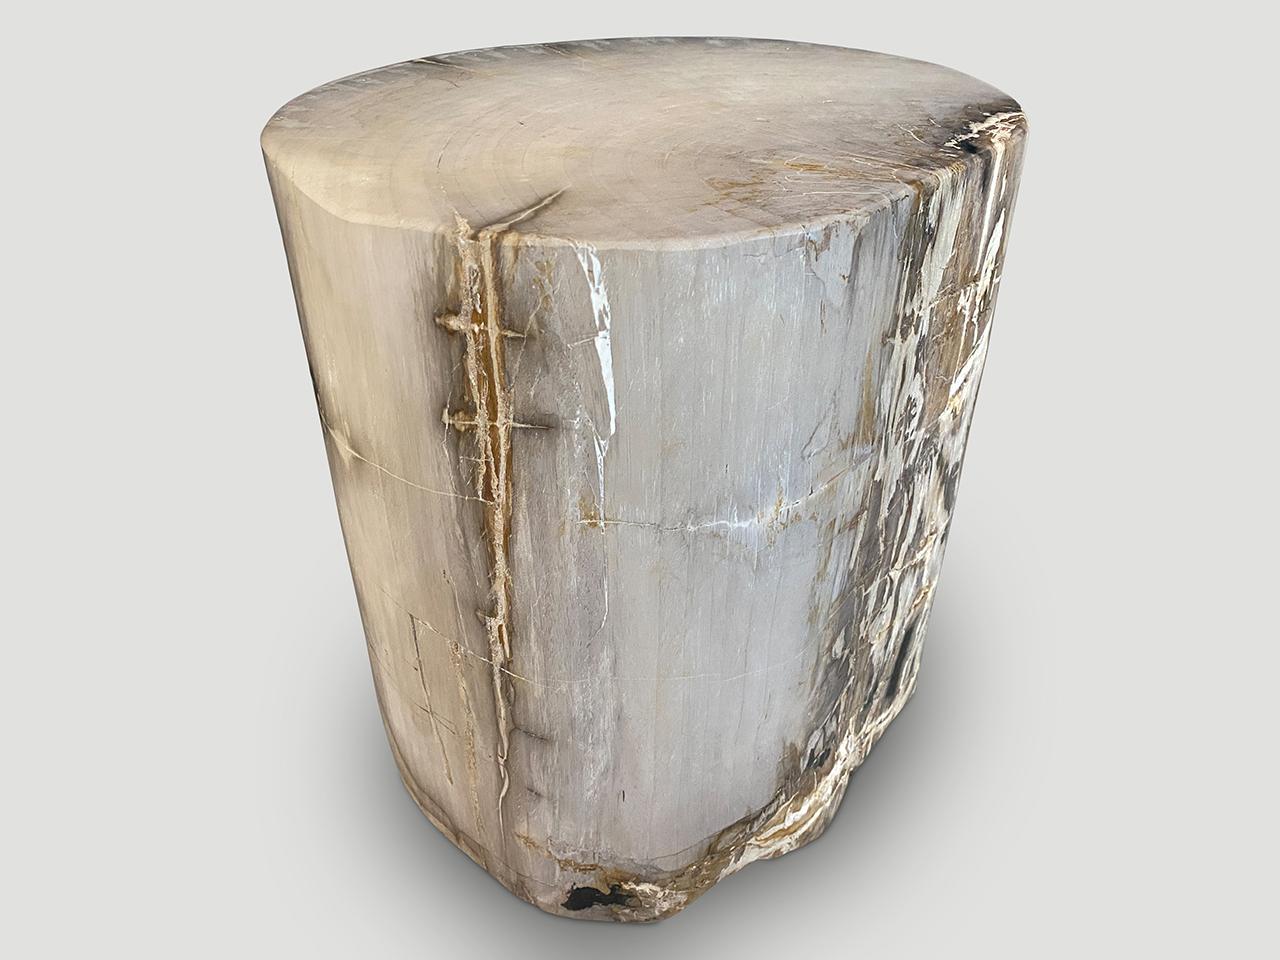 Andrianna Shamaris Grey Toned High Quality Petrified Wood Side Table In Excellent Condition For Sale In New York, NY